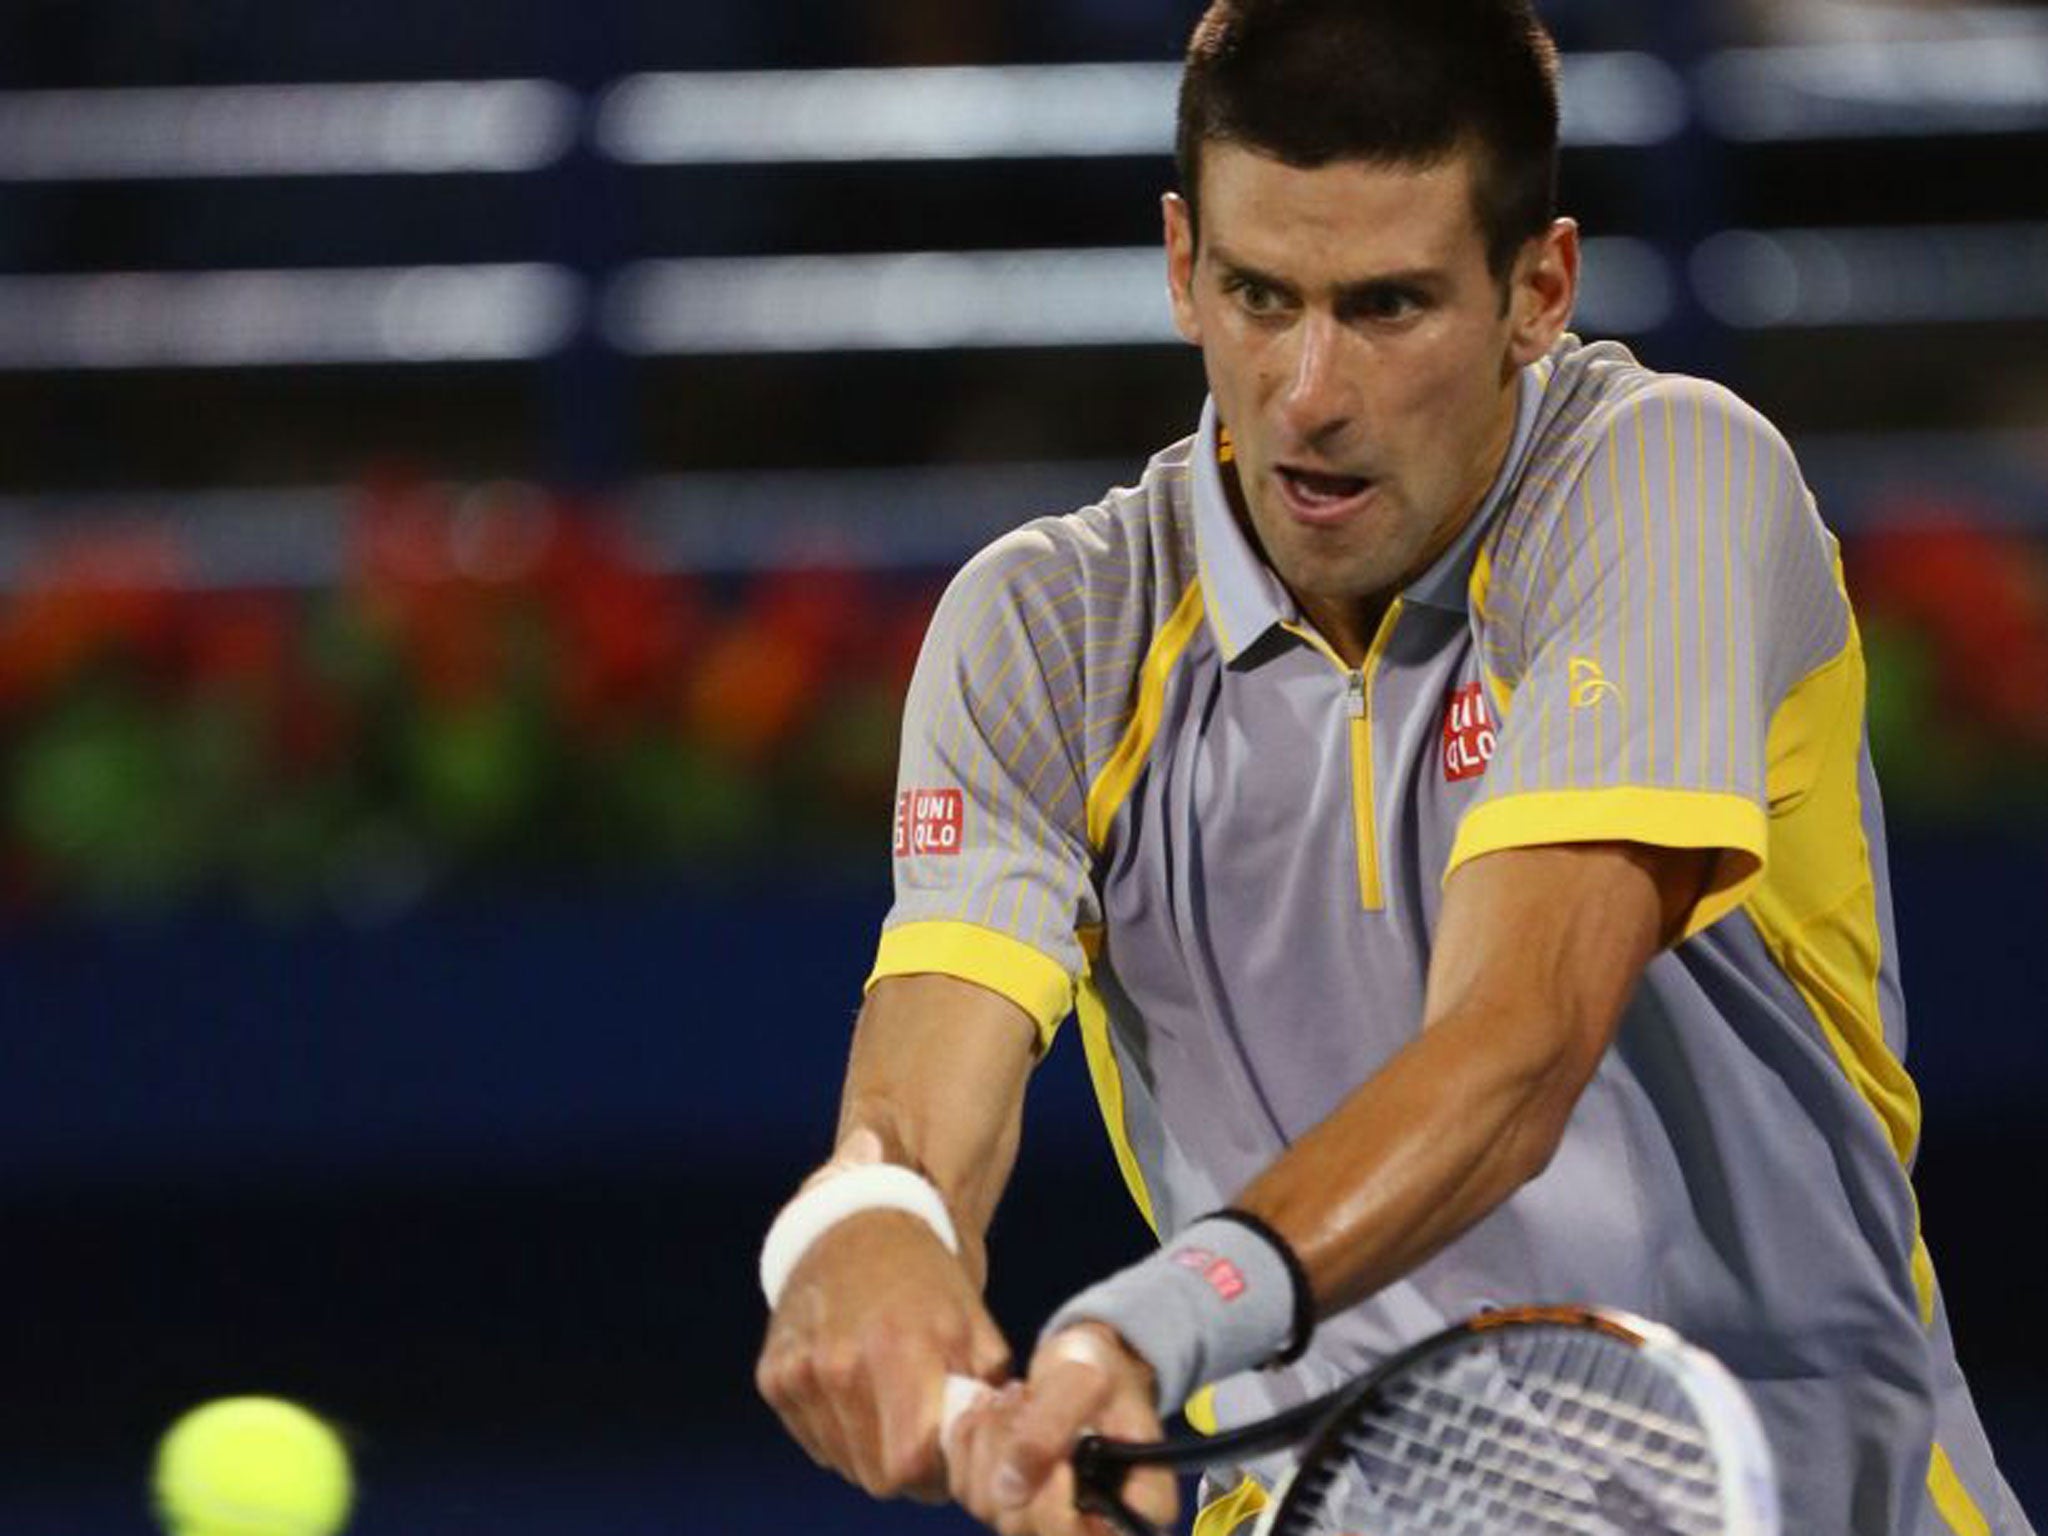 Novak Djokovic on his way to a 6-0, 6-3 victory over Andreas Seppi